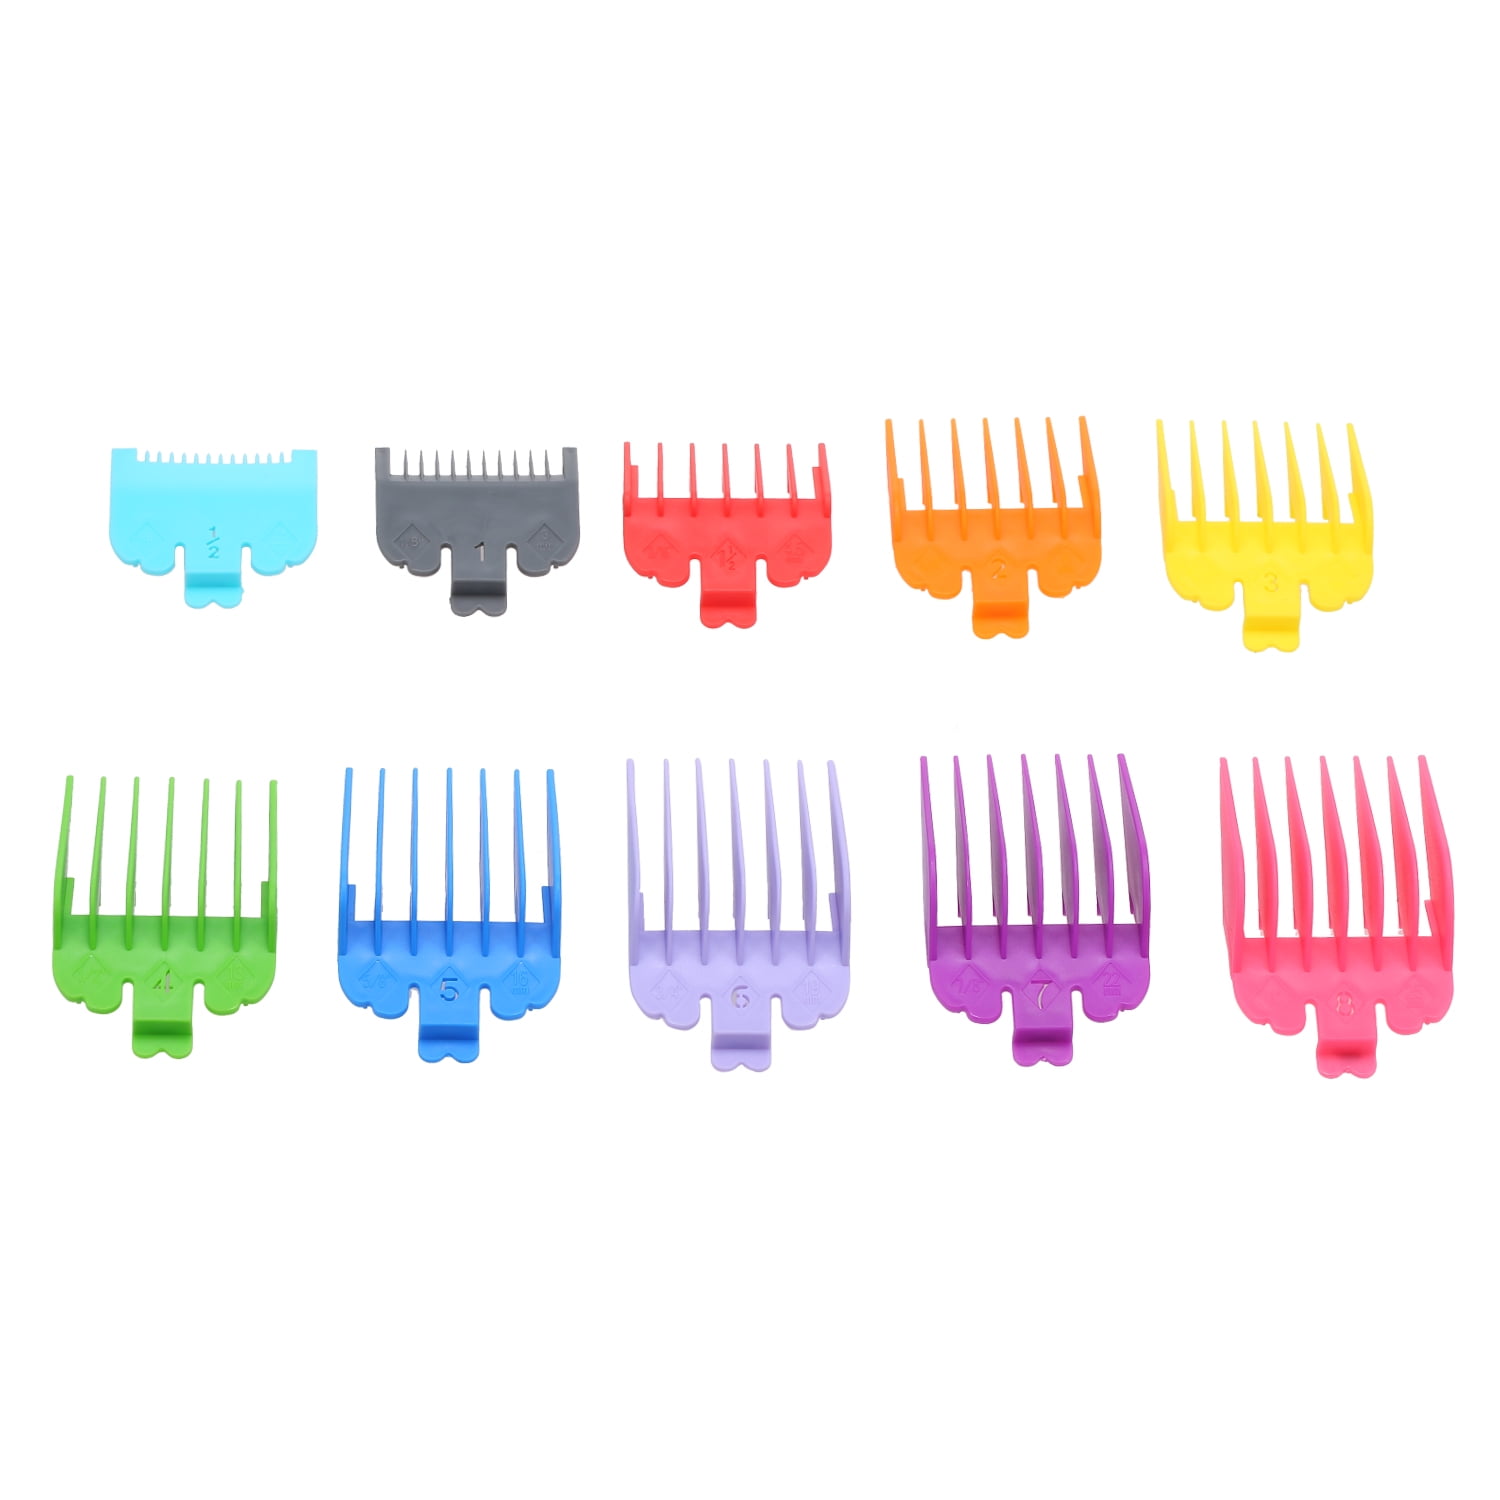 wahl hair clipper comb sizes